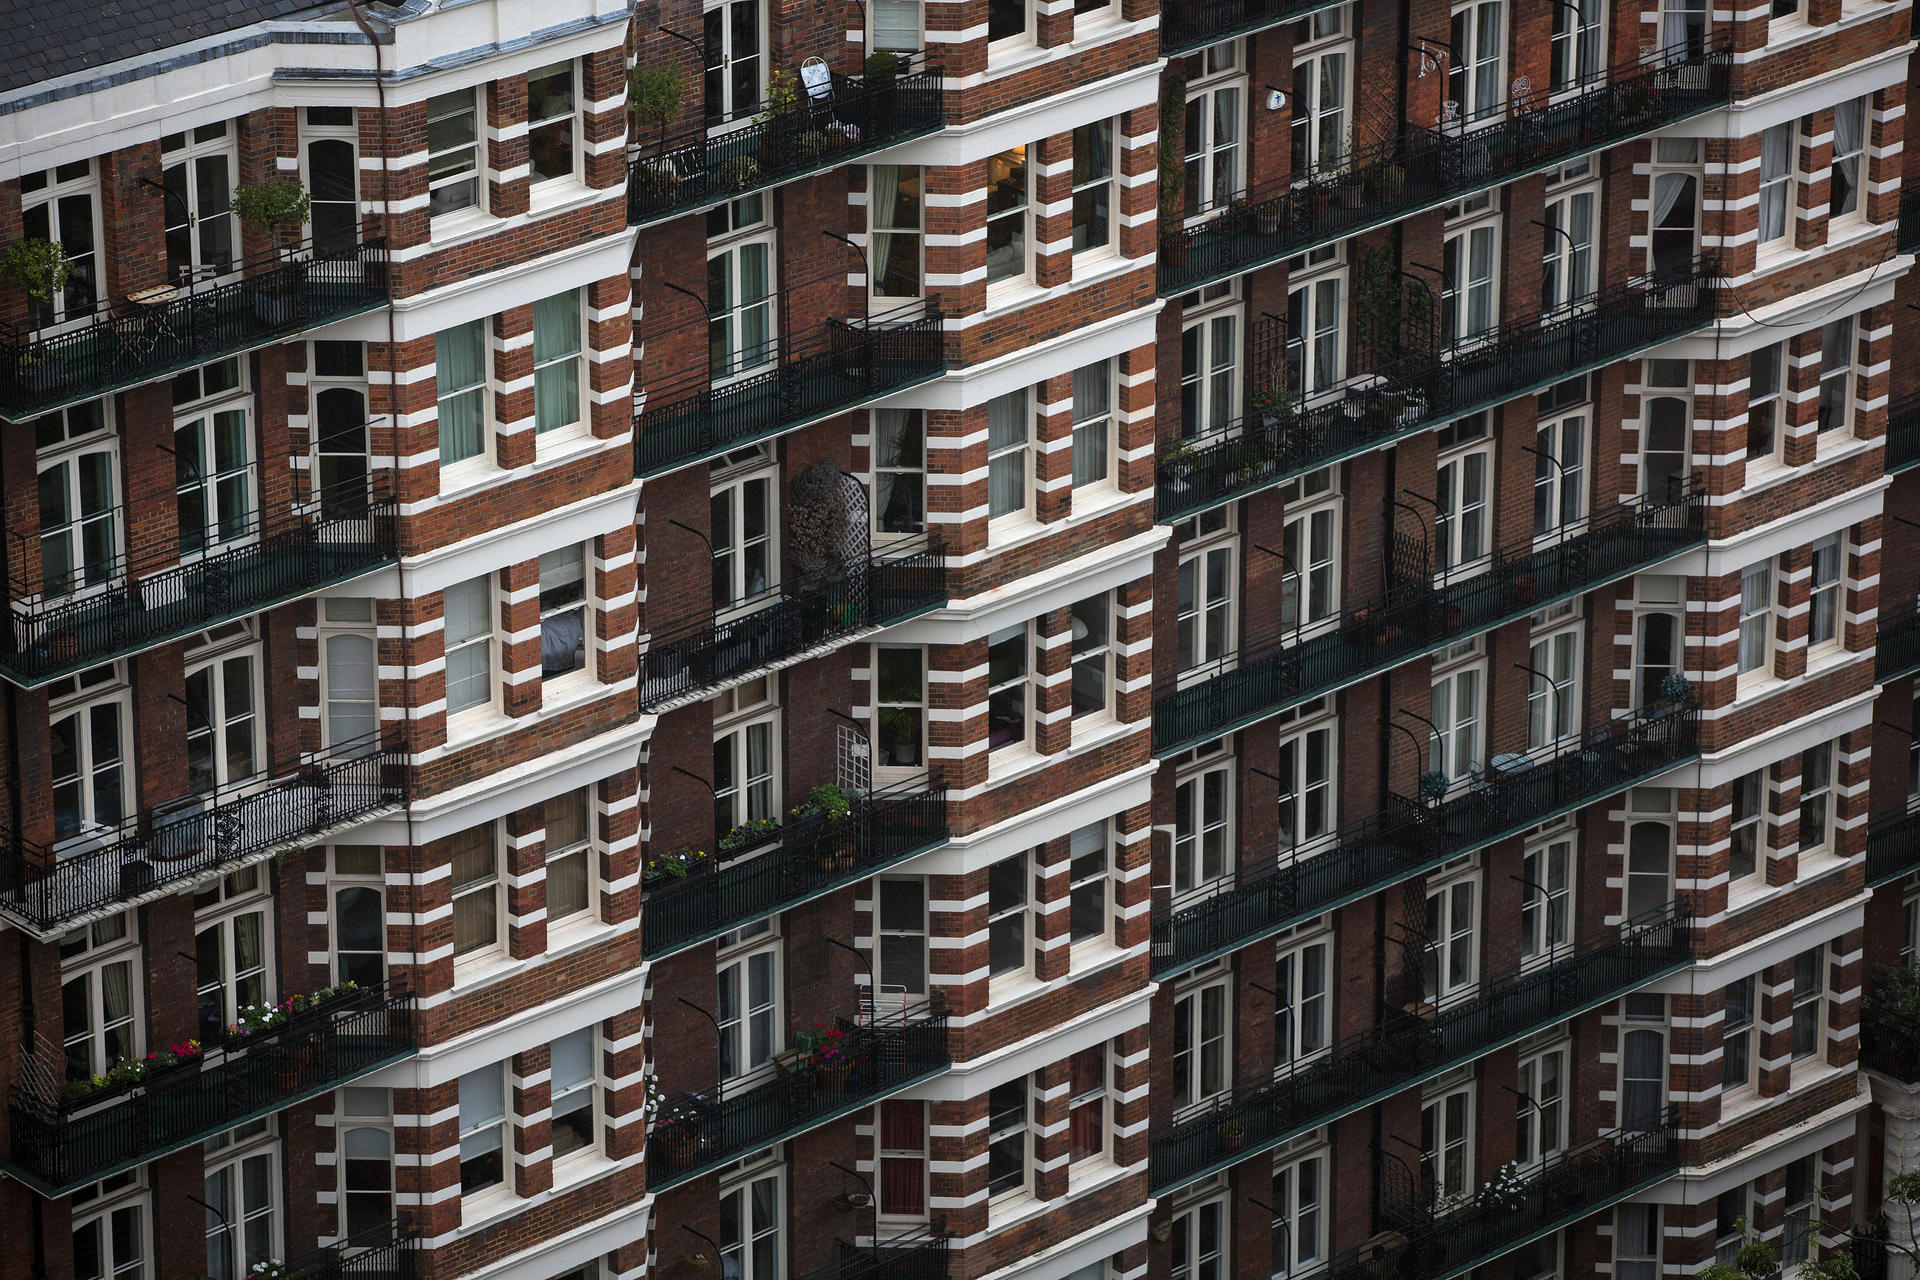 British housing continues to be one of the first choices for investors in Hong Kong and the Chinese mainland. Photo: Bloomberg